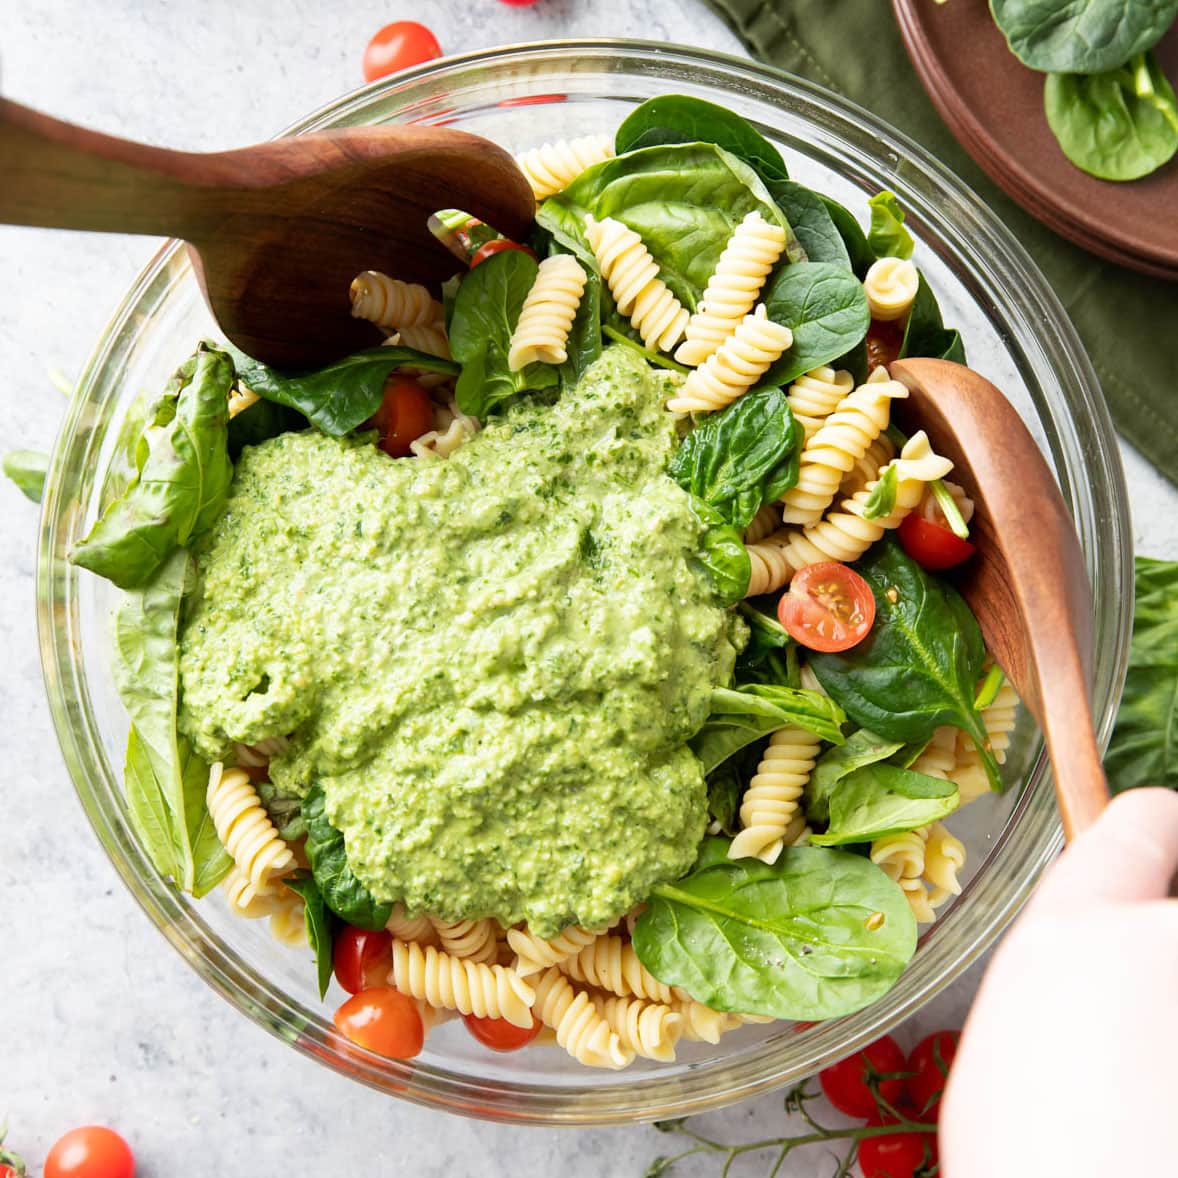 Hands holding two wooden salad tongs to mix pesto sauce onto fresh basil and tomato pasta salad